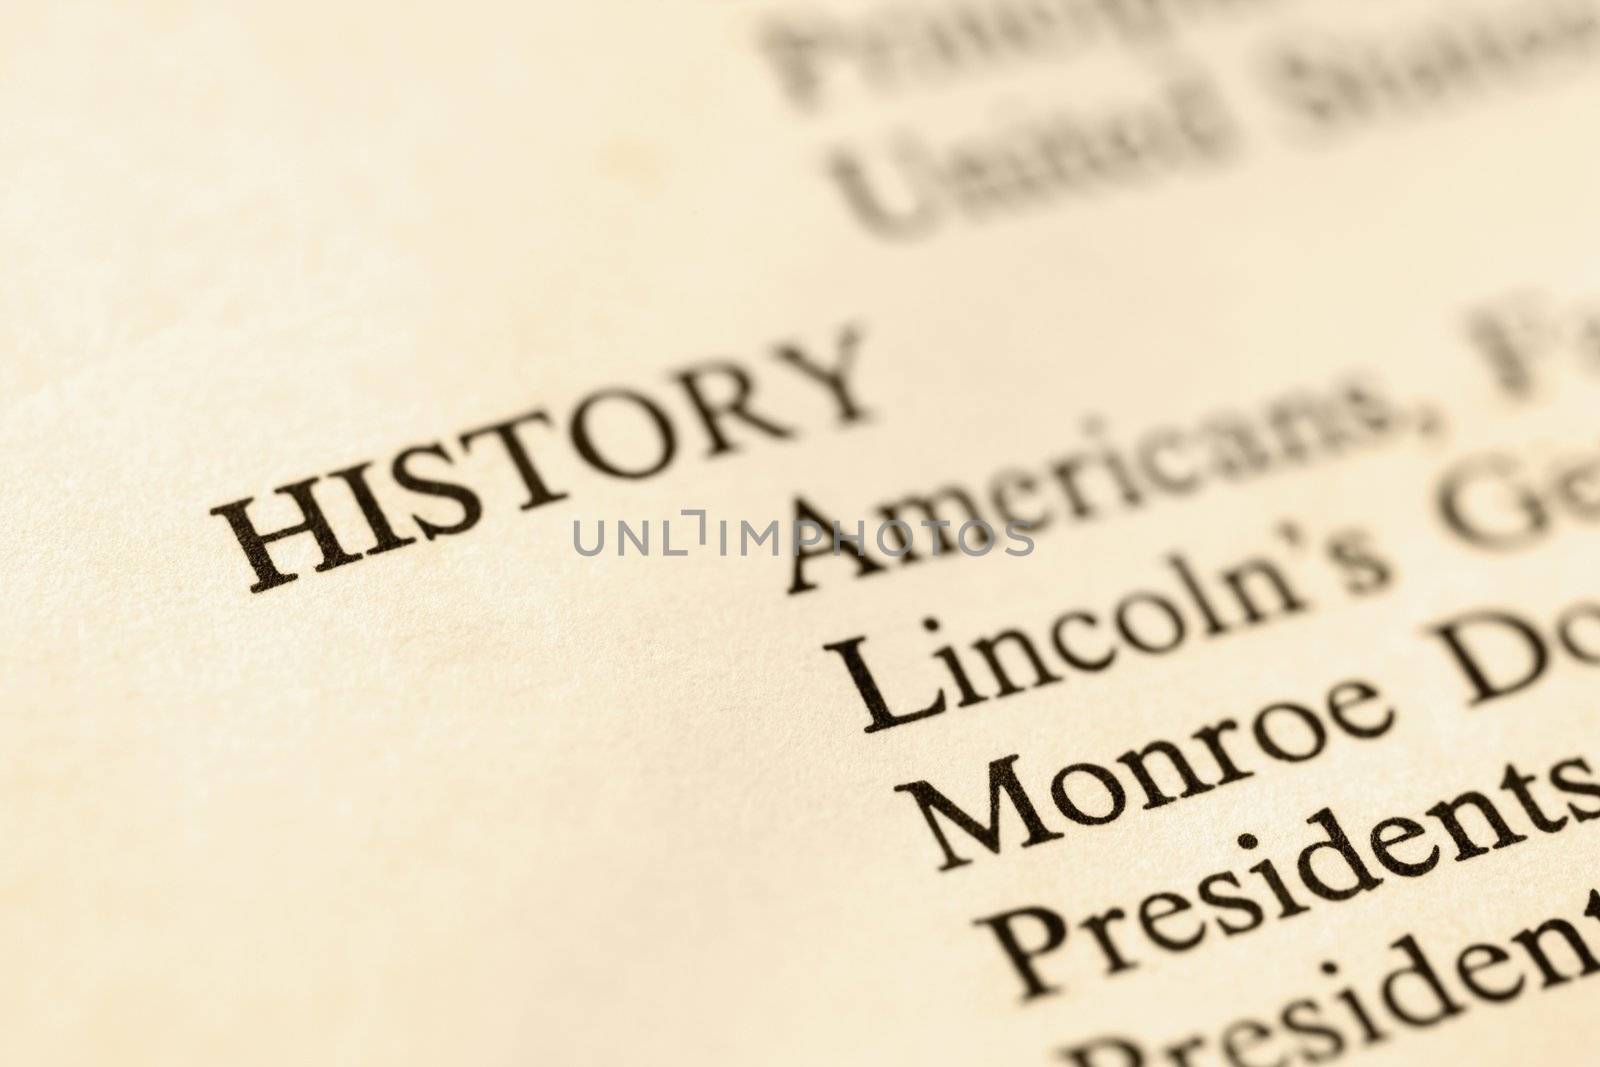 Selective focus of page with the word history and corresponding categories.